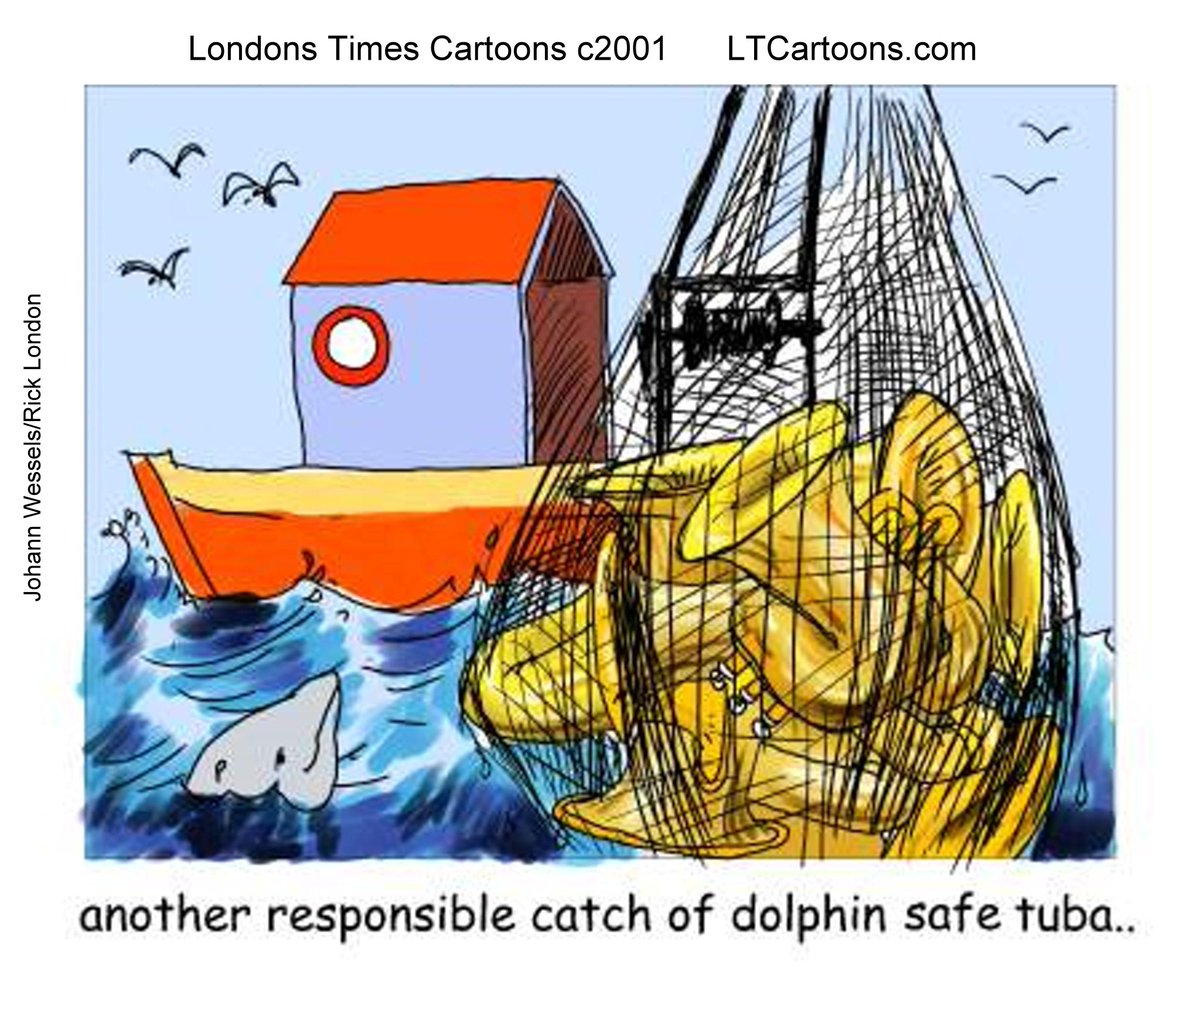 Over 1/4 billion Americans prefer #onlineshopping
from the comfort of home 4 #exclusive #funny @RickLondon Gifts @zazzle ends soon #worldwideshipping #freepersonalization Order a #happygift & #savemoney #tuba #dolphin tinyurl.com/2p2z2hem